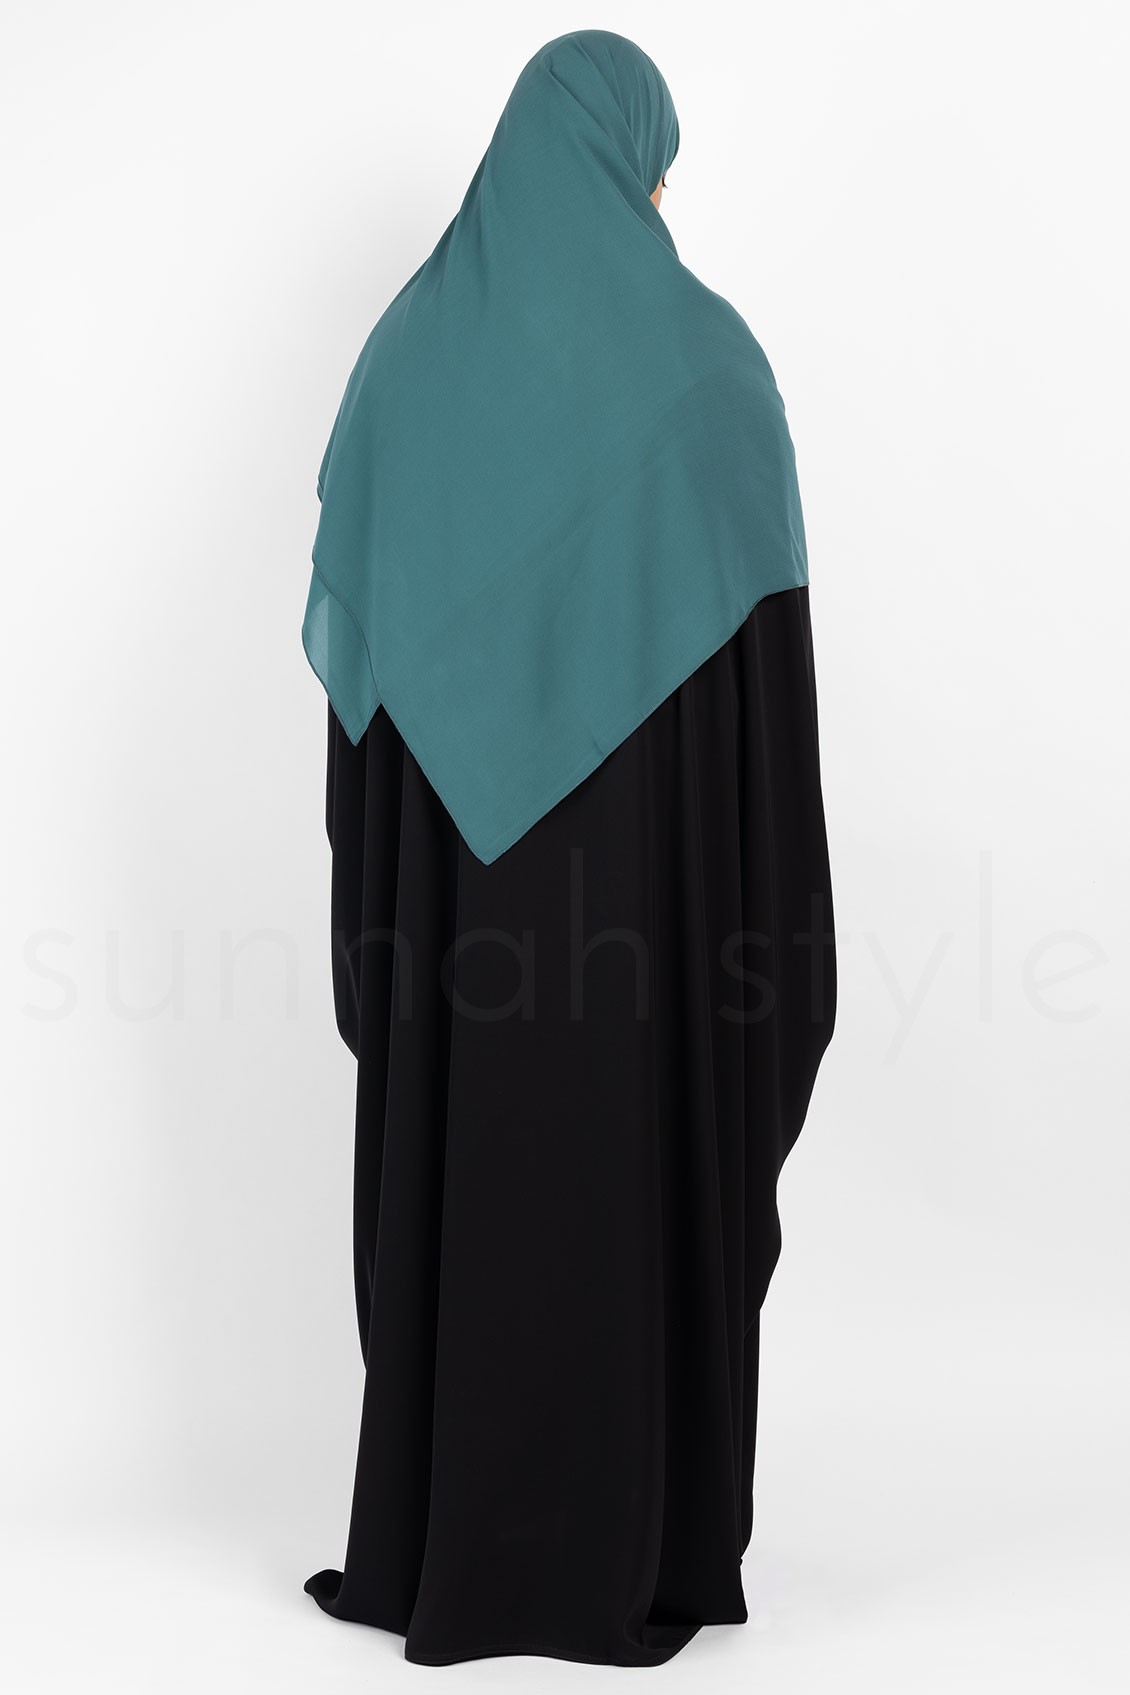 Sunnah Style Essentials Shayla - Large Teal